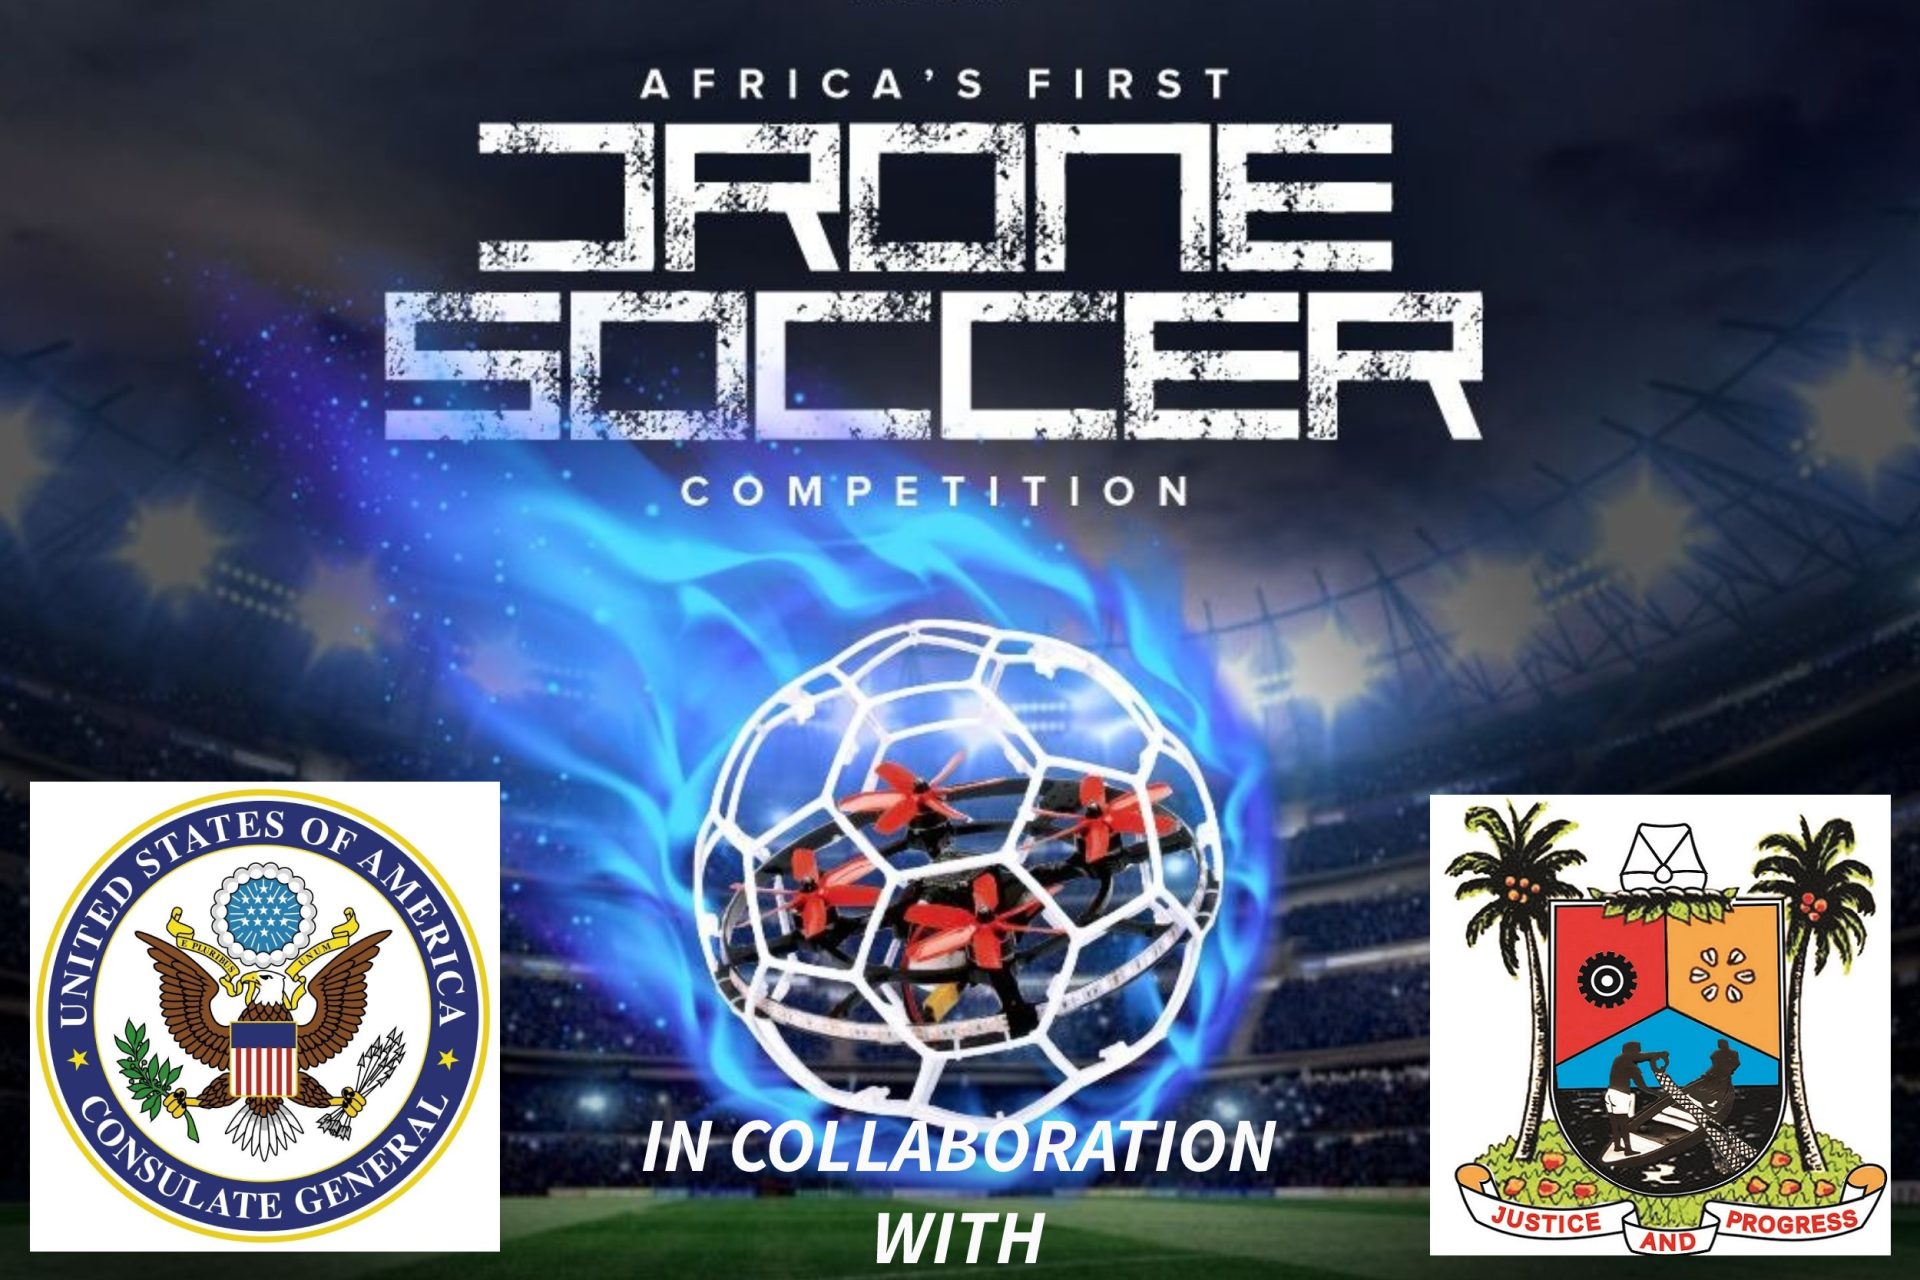 LAGOS STATE IN COLLABORATION WITH US CONSULATE PILOTS AFRICA’S FIRST DRONE SOCCER COMPETITION